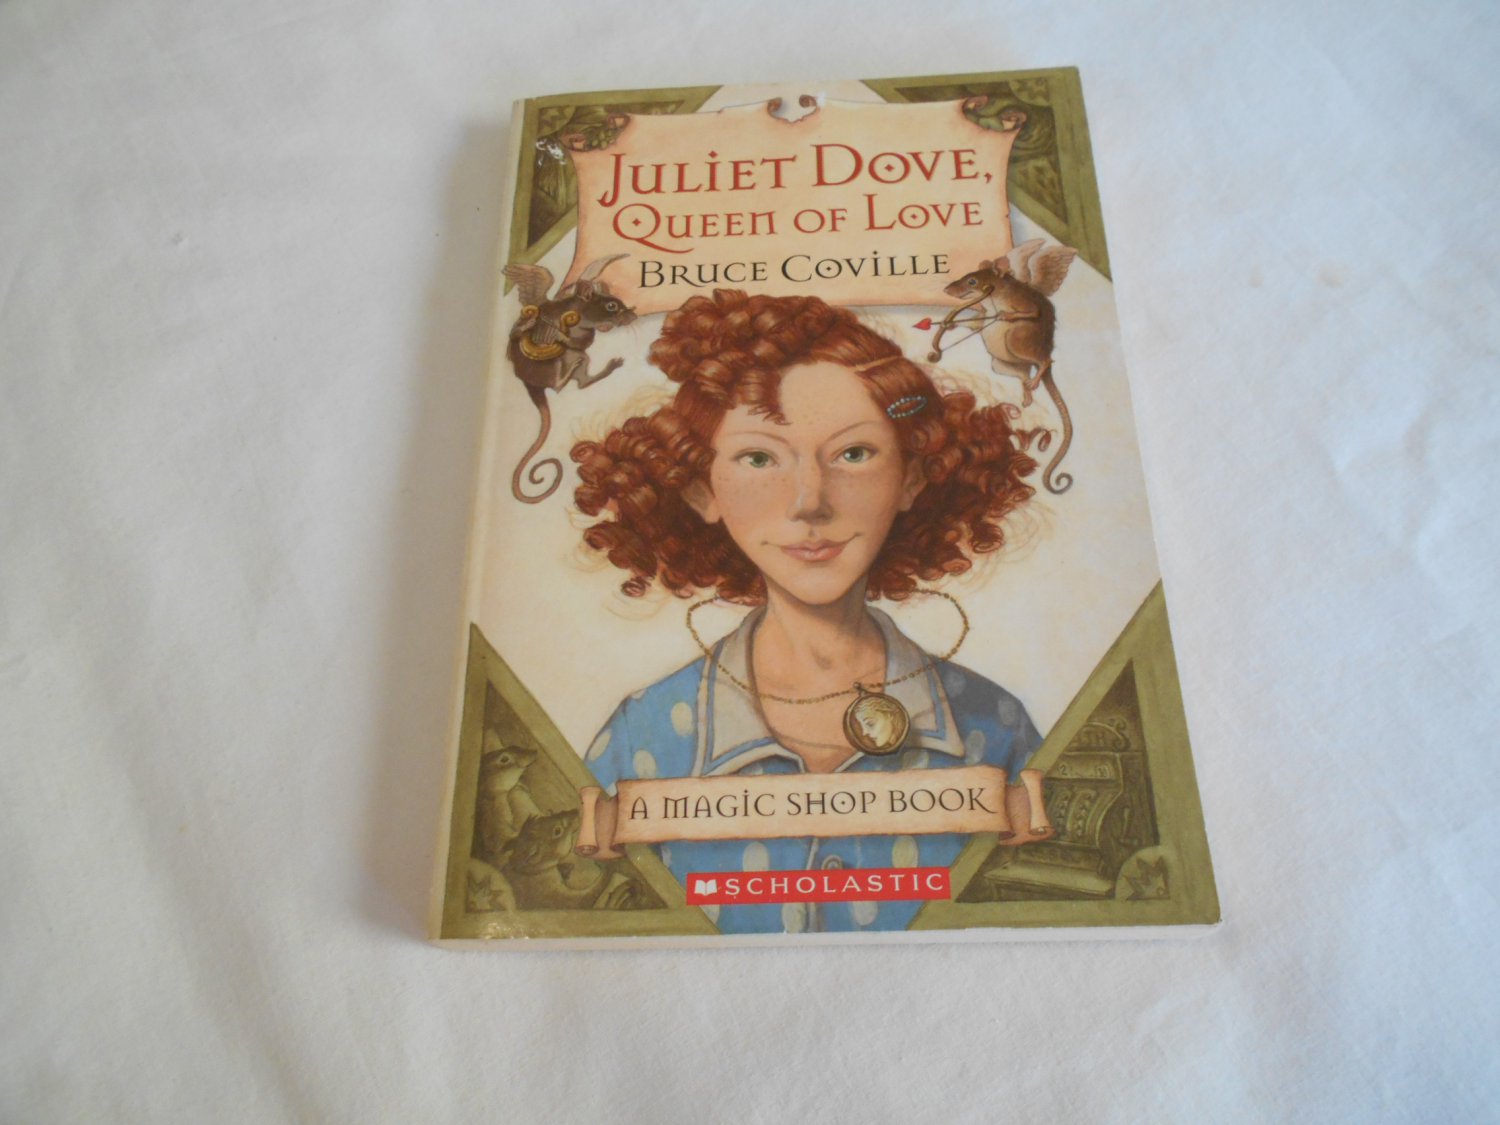 juliet dove queen of love by bruce coville